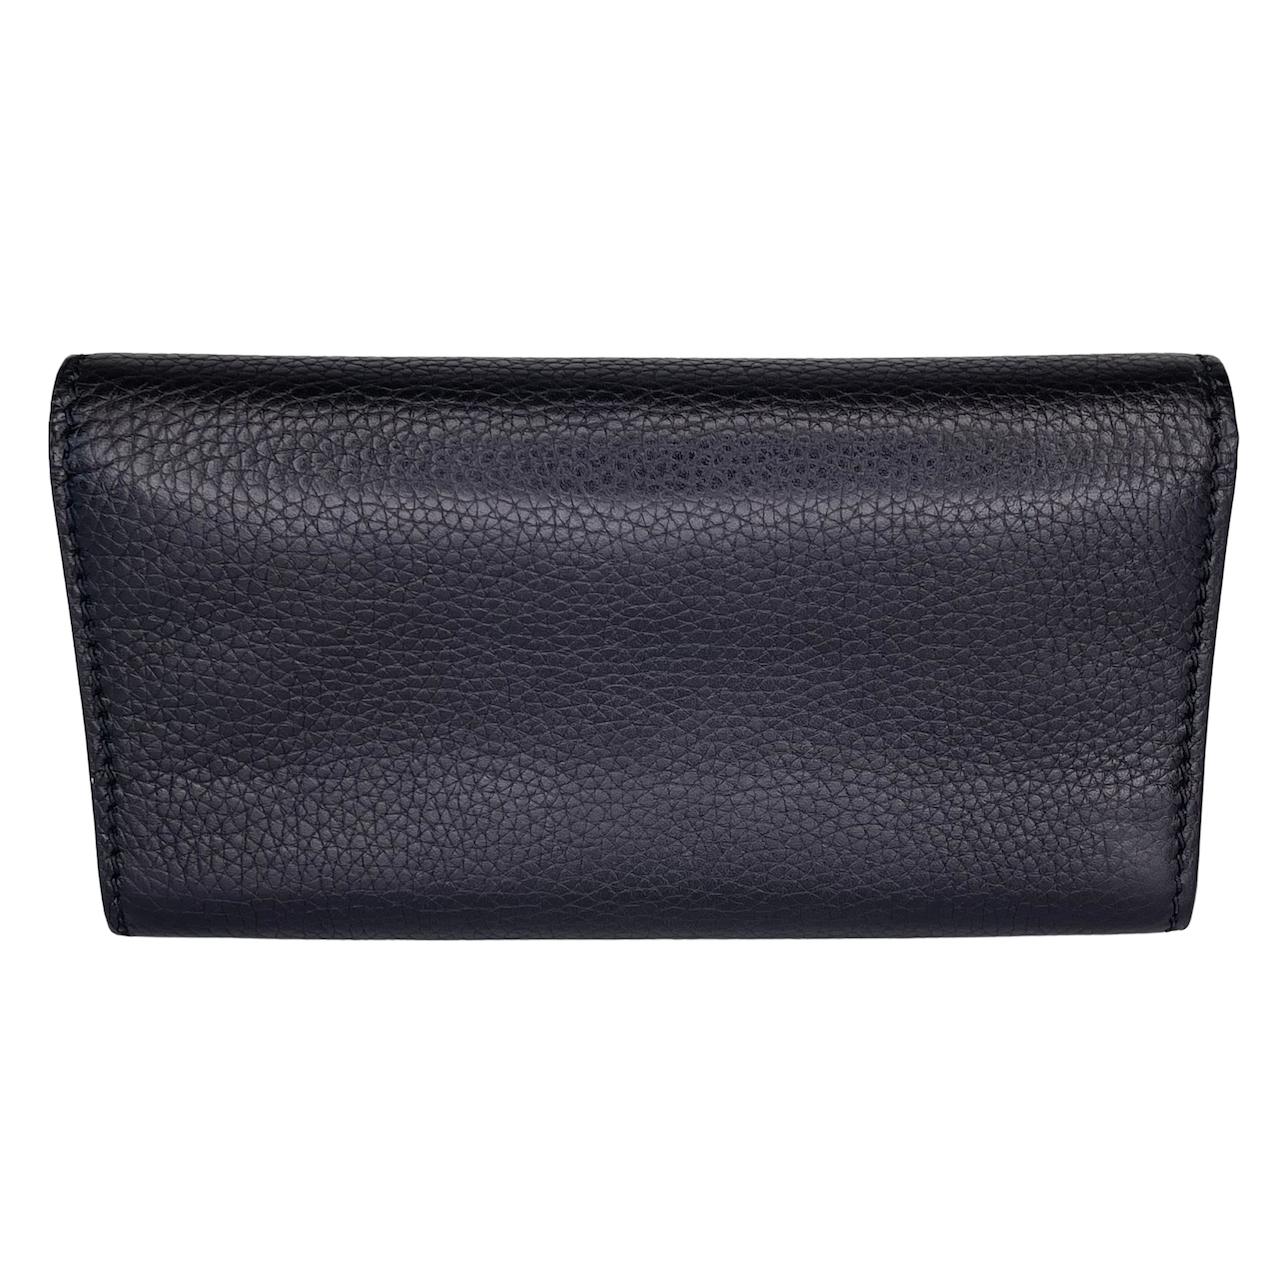 This wallet is made from calfskin leather in black. The wallet features a gold press lock, and a gold J'ADIOR on the front flap, a smooth black leather interior with patch packets and a zipper pouch.

COLOR: Black 
MATERIAL: Calfskin leather
ITEM